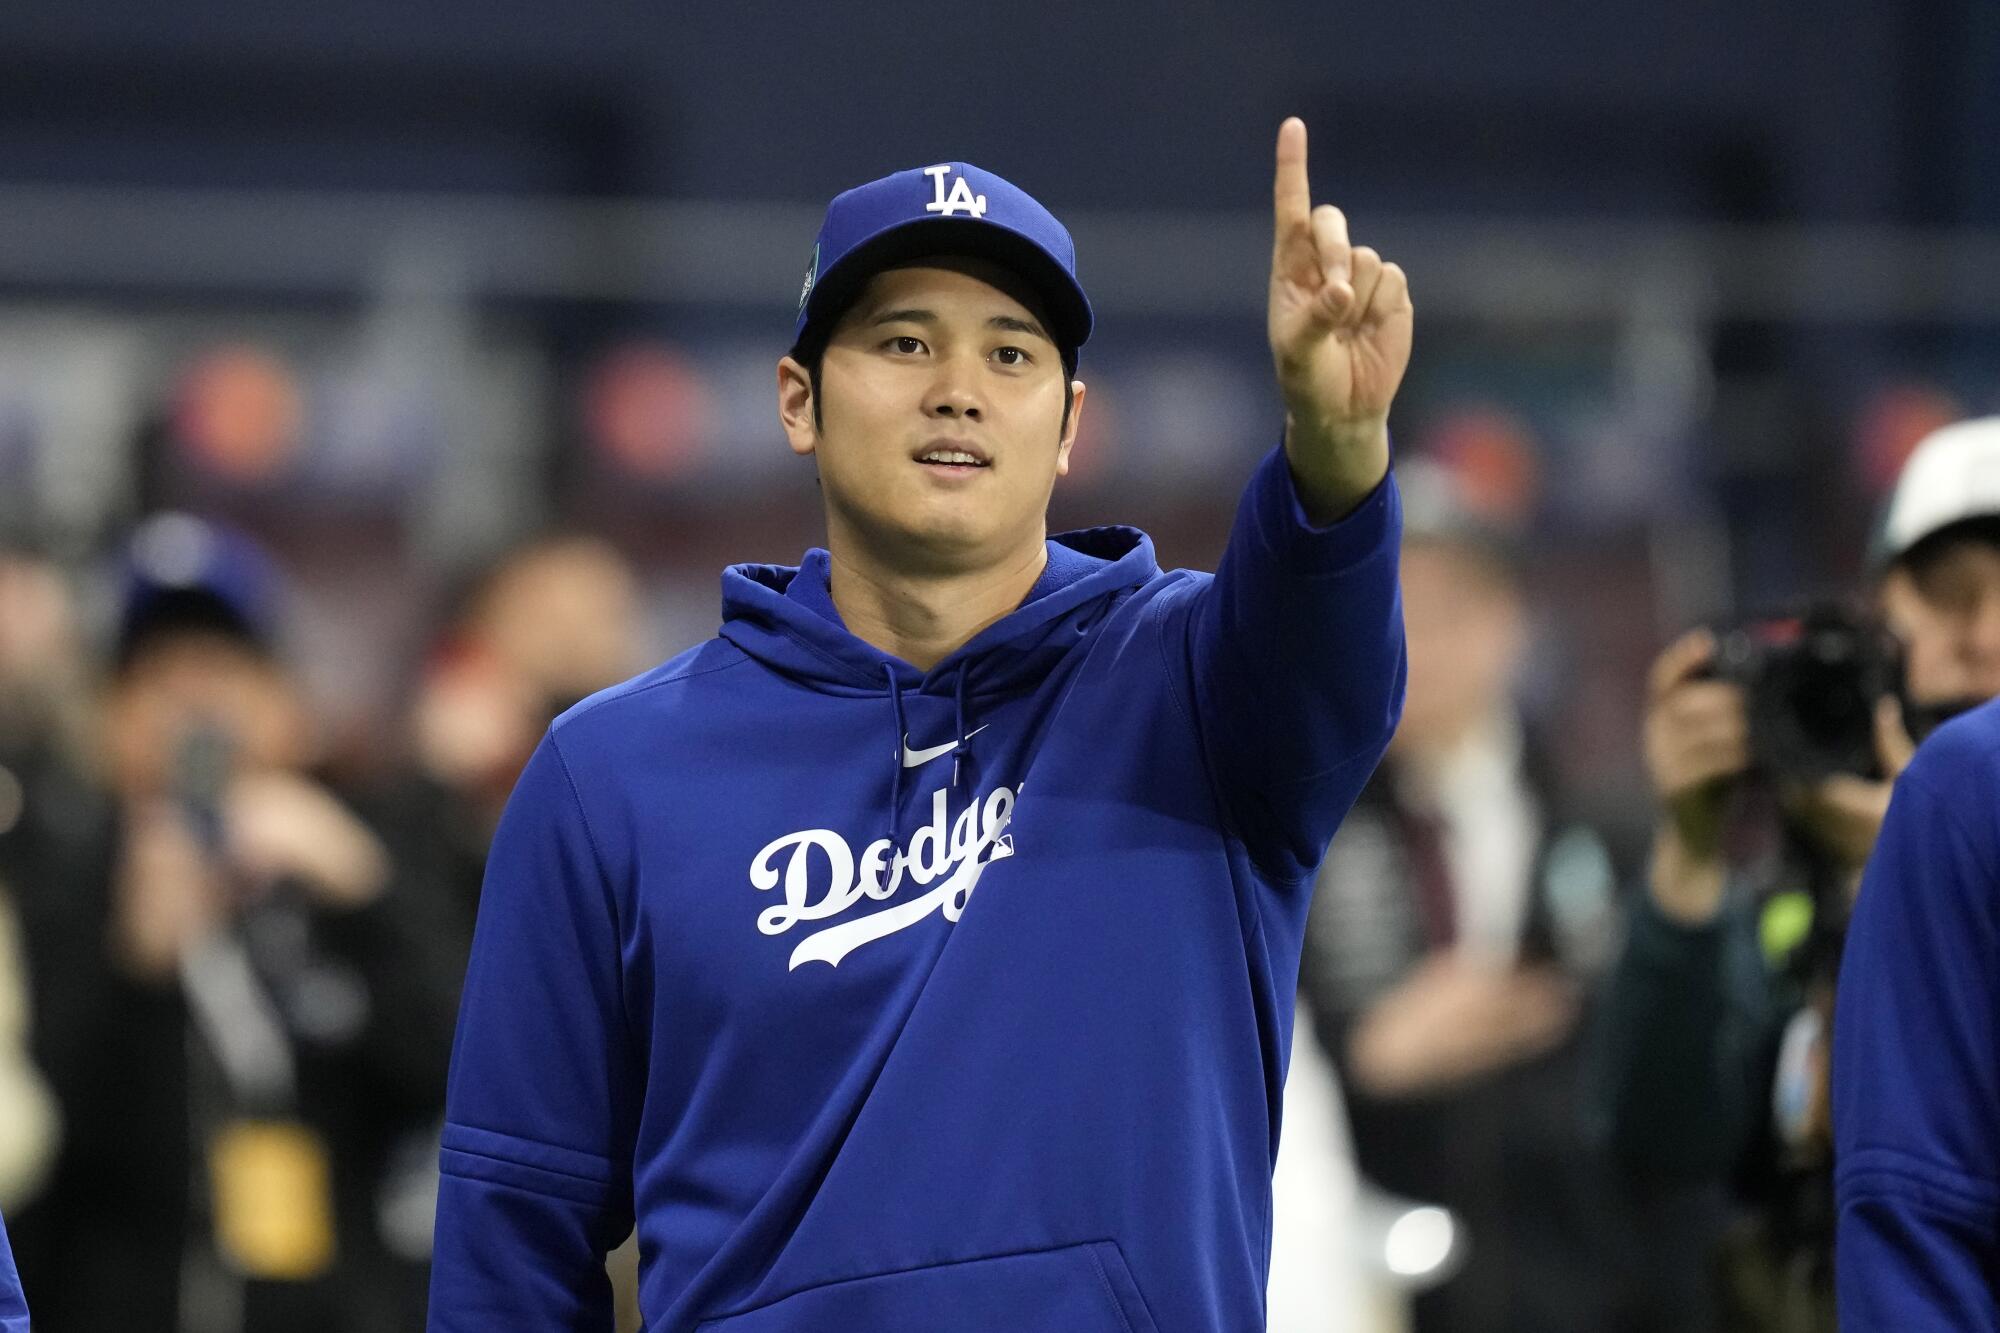 Dodgers star Shohei Ohtani gestures before a game against the San Diego Padres in South Korea on March 20.